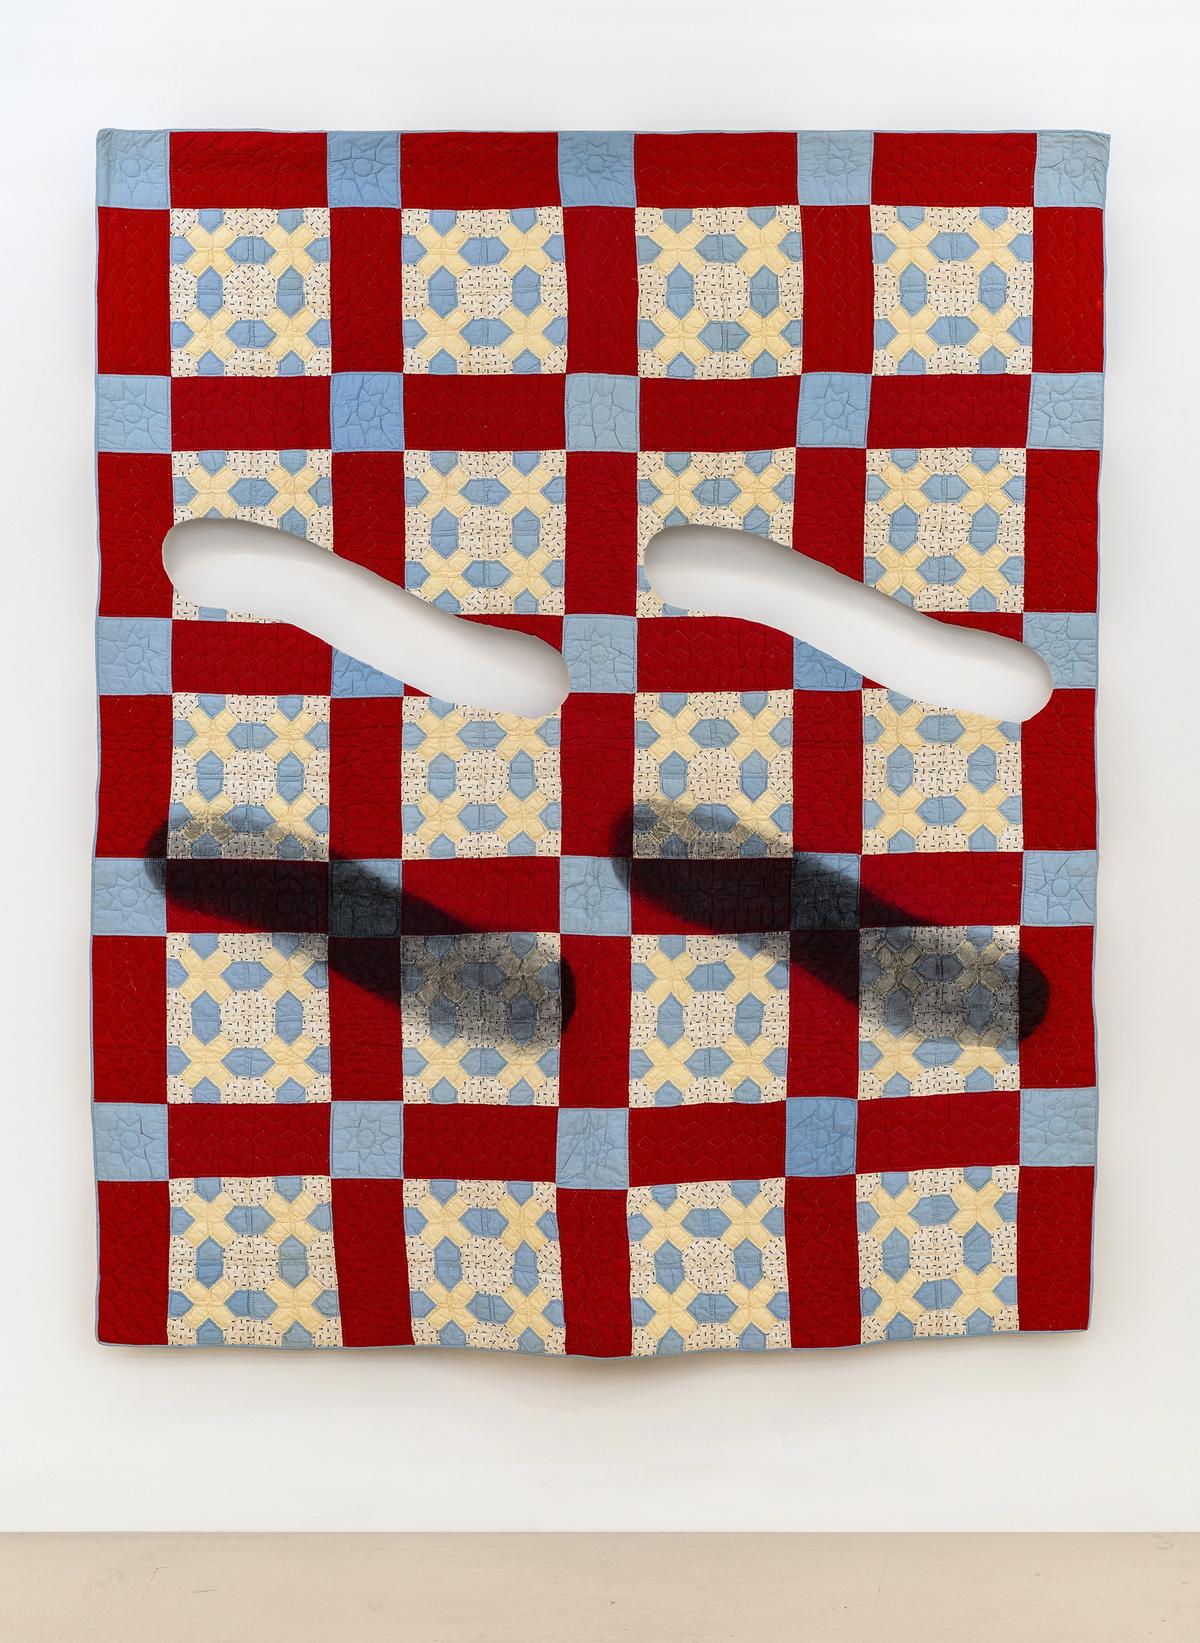 Sanford Biggers, Somethin’ Close to Nothin’ (2019), paint on antique quilt, joins the City of Miami Beach Public Art Collection Courtesy of the artist and David Castillo. Photo: Zachary Balber